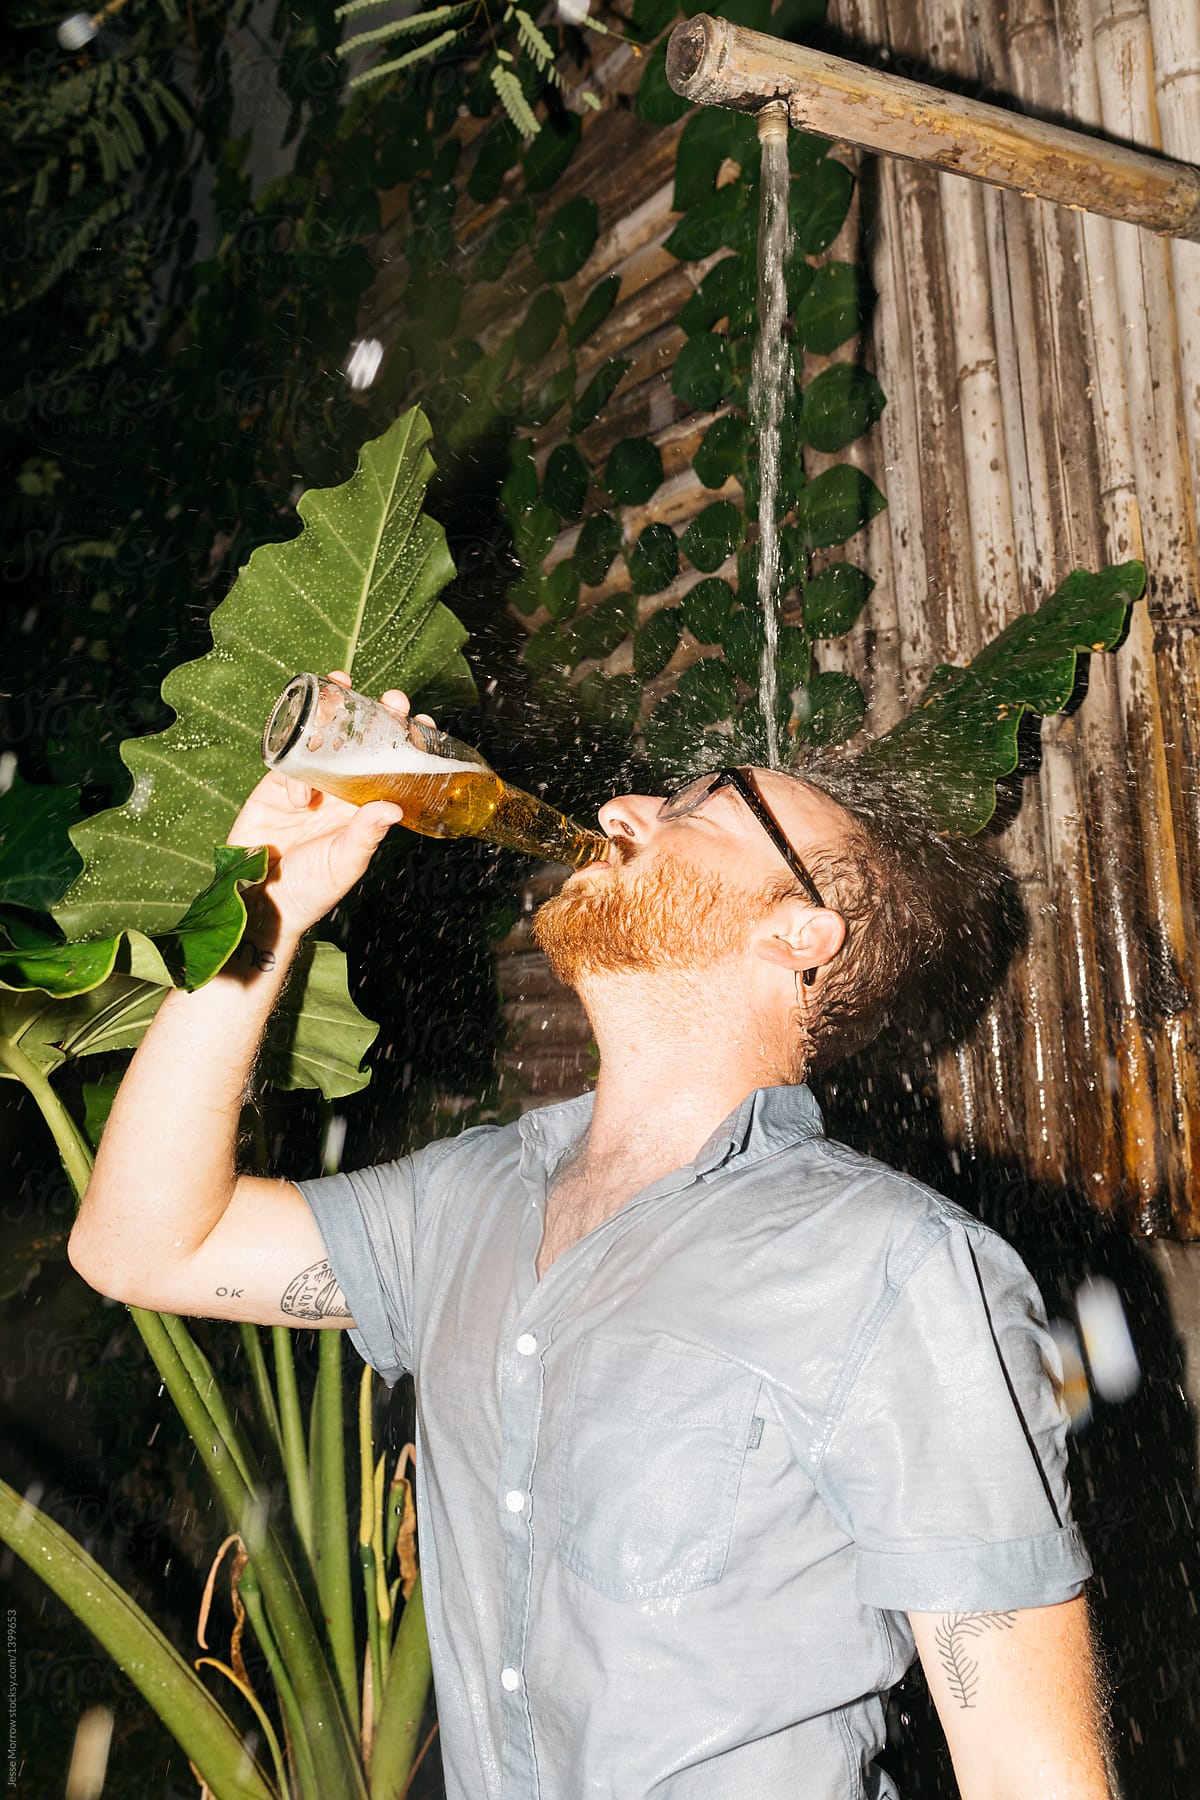 Young man drinks beer fully clothed in outdoor wild shower with large plants